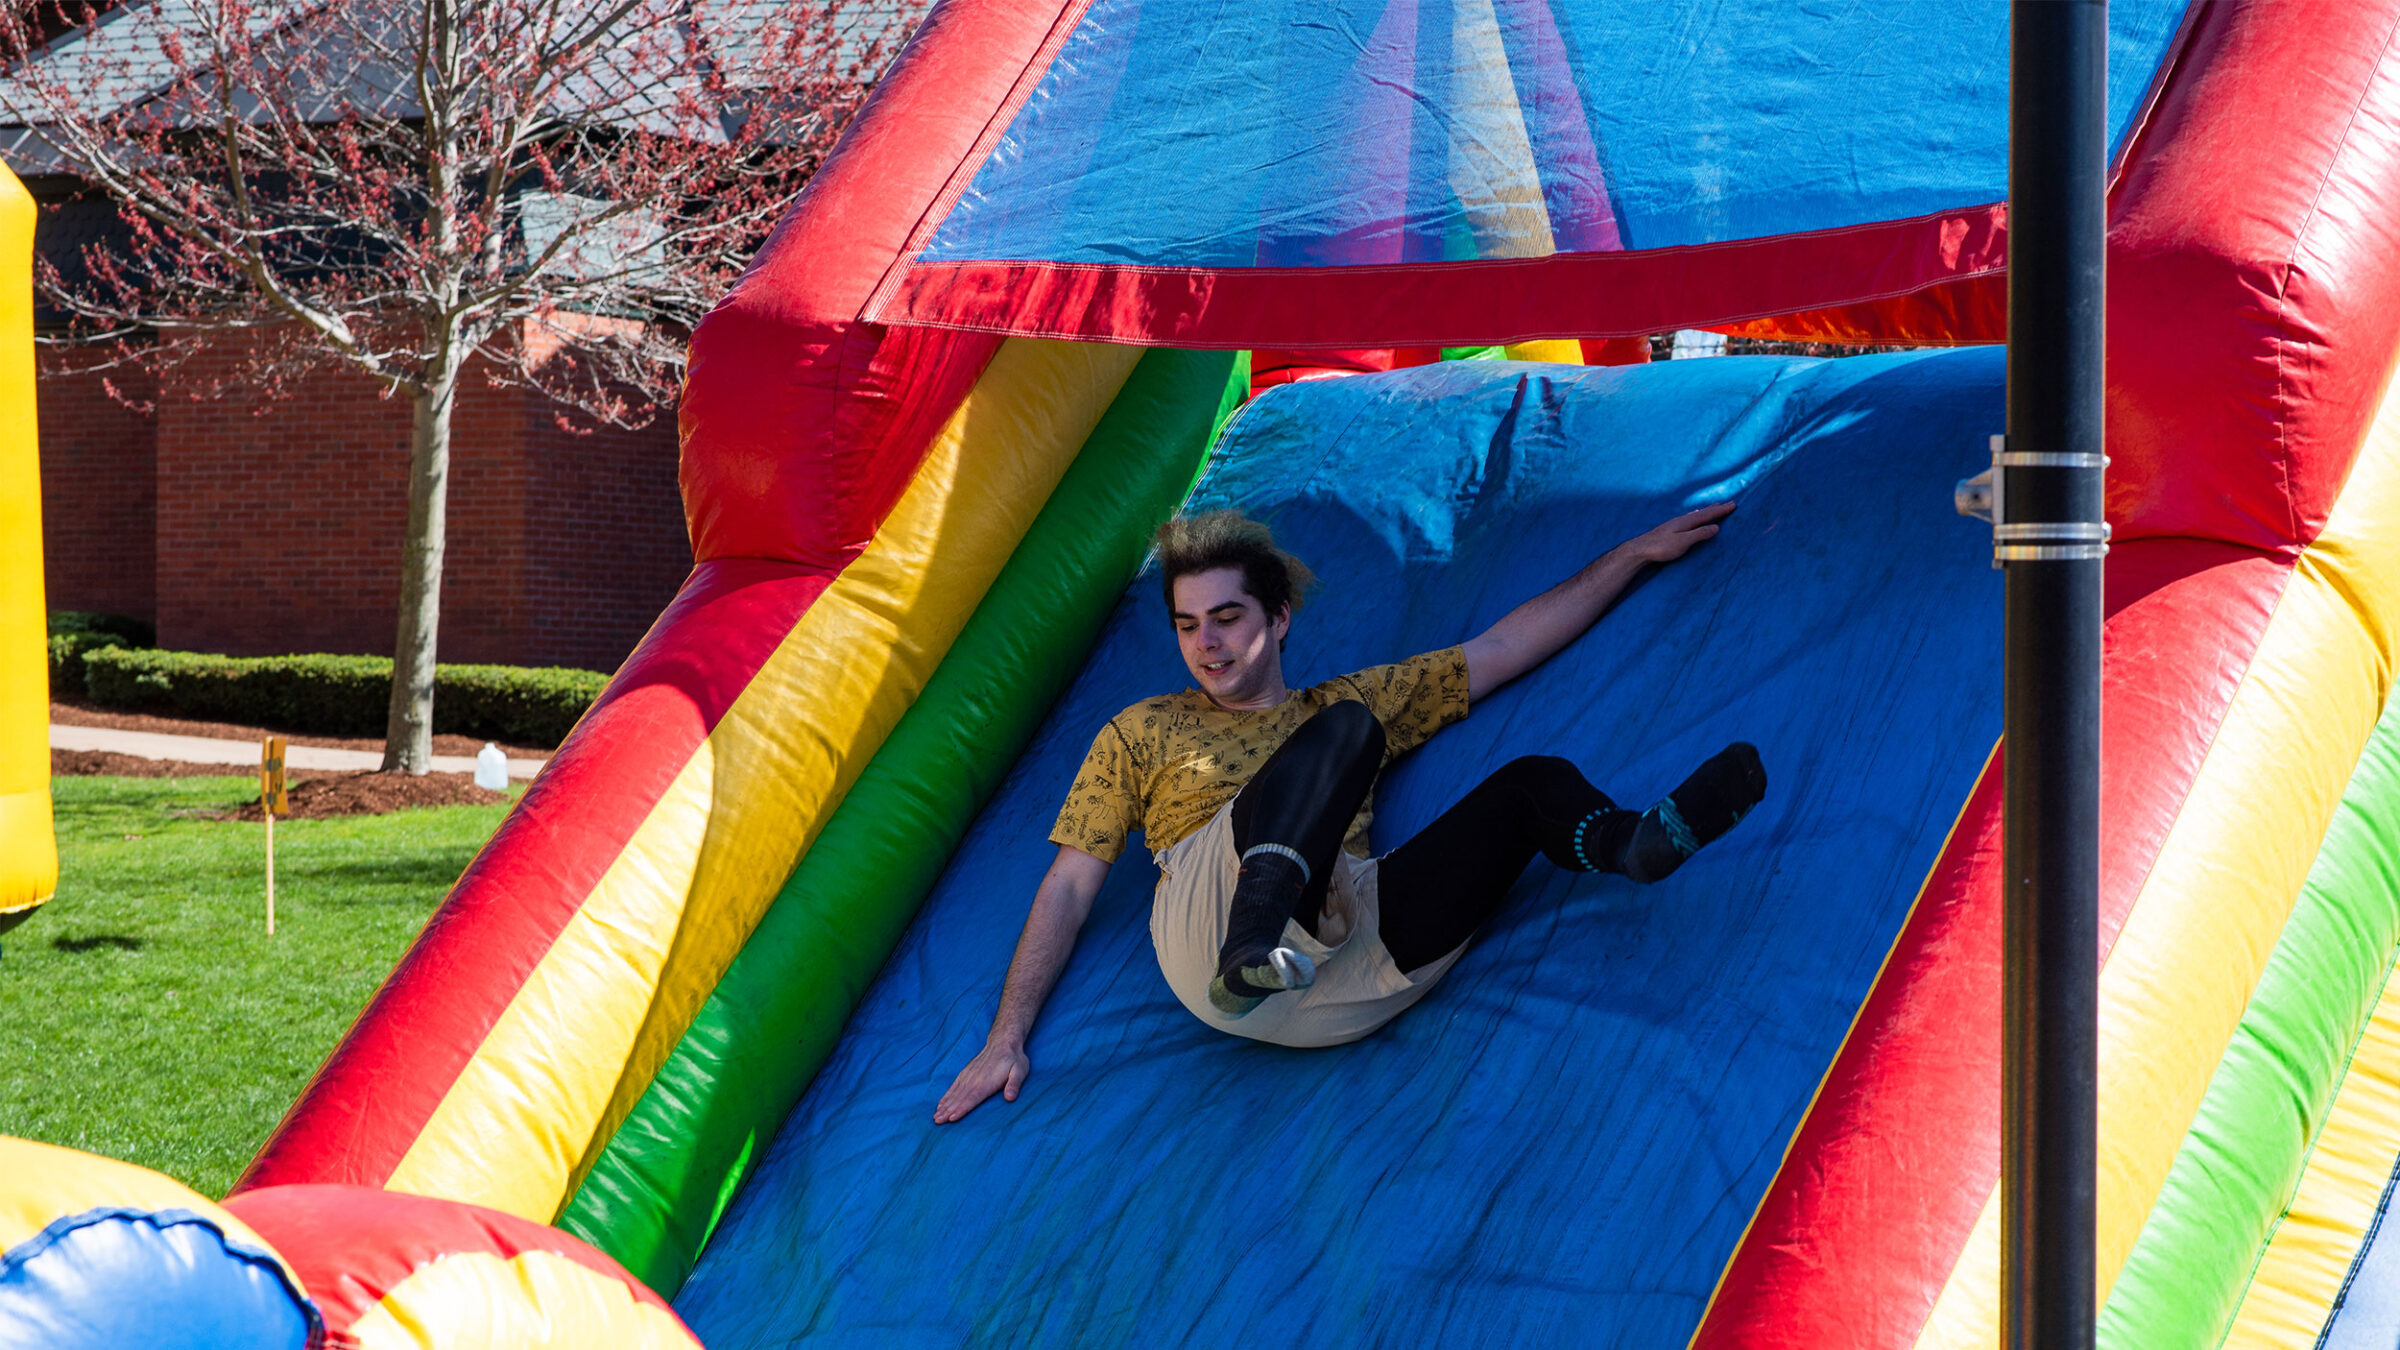 a student slides down an inflatable bouncy house slide that is blue, red, green, and yellow